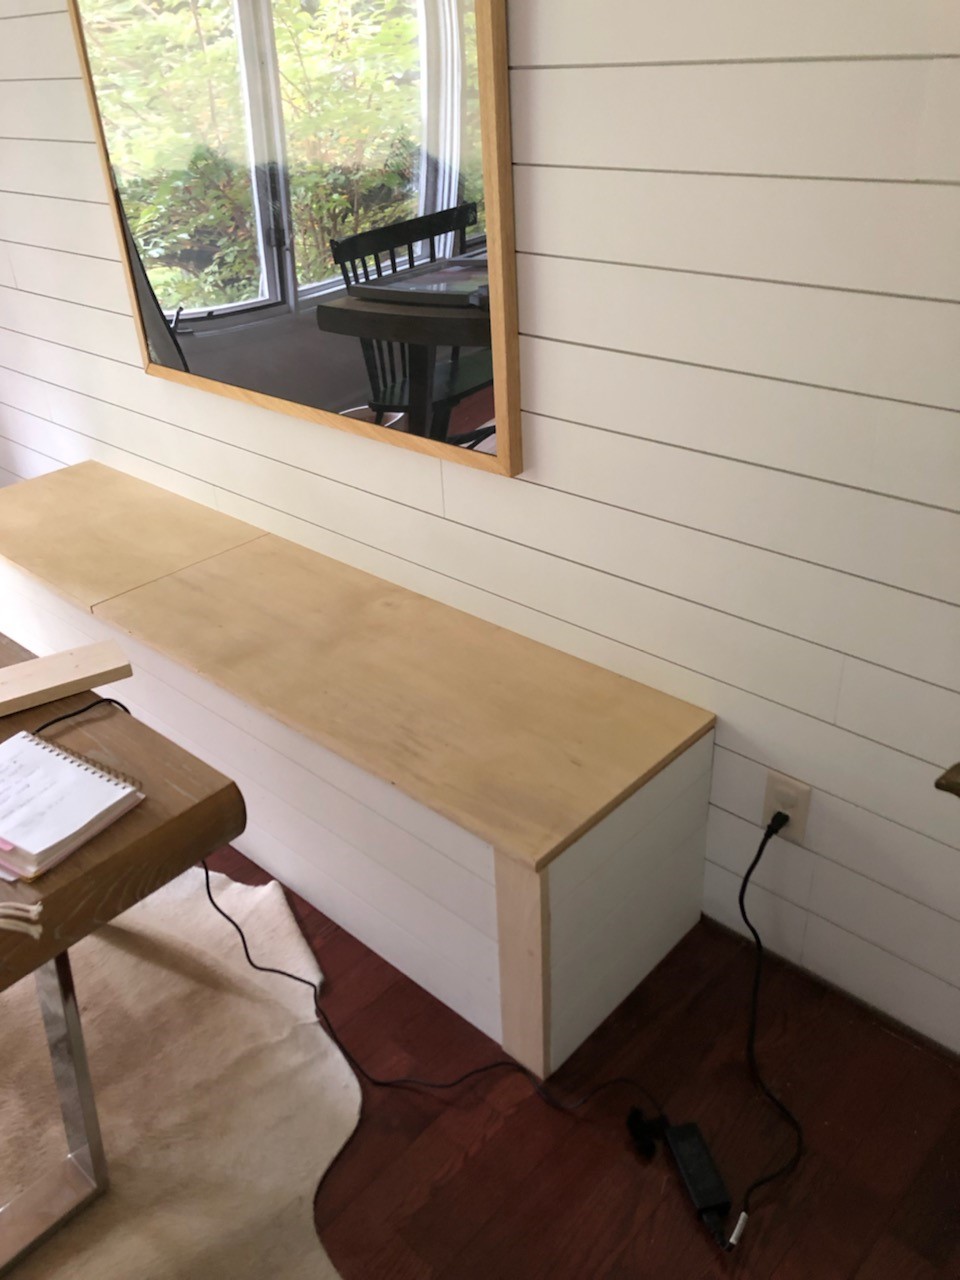 Diy Built-In Dining Bench With Storage - Breakfast Nook Banquette Tutorial